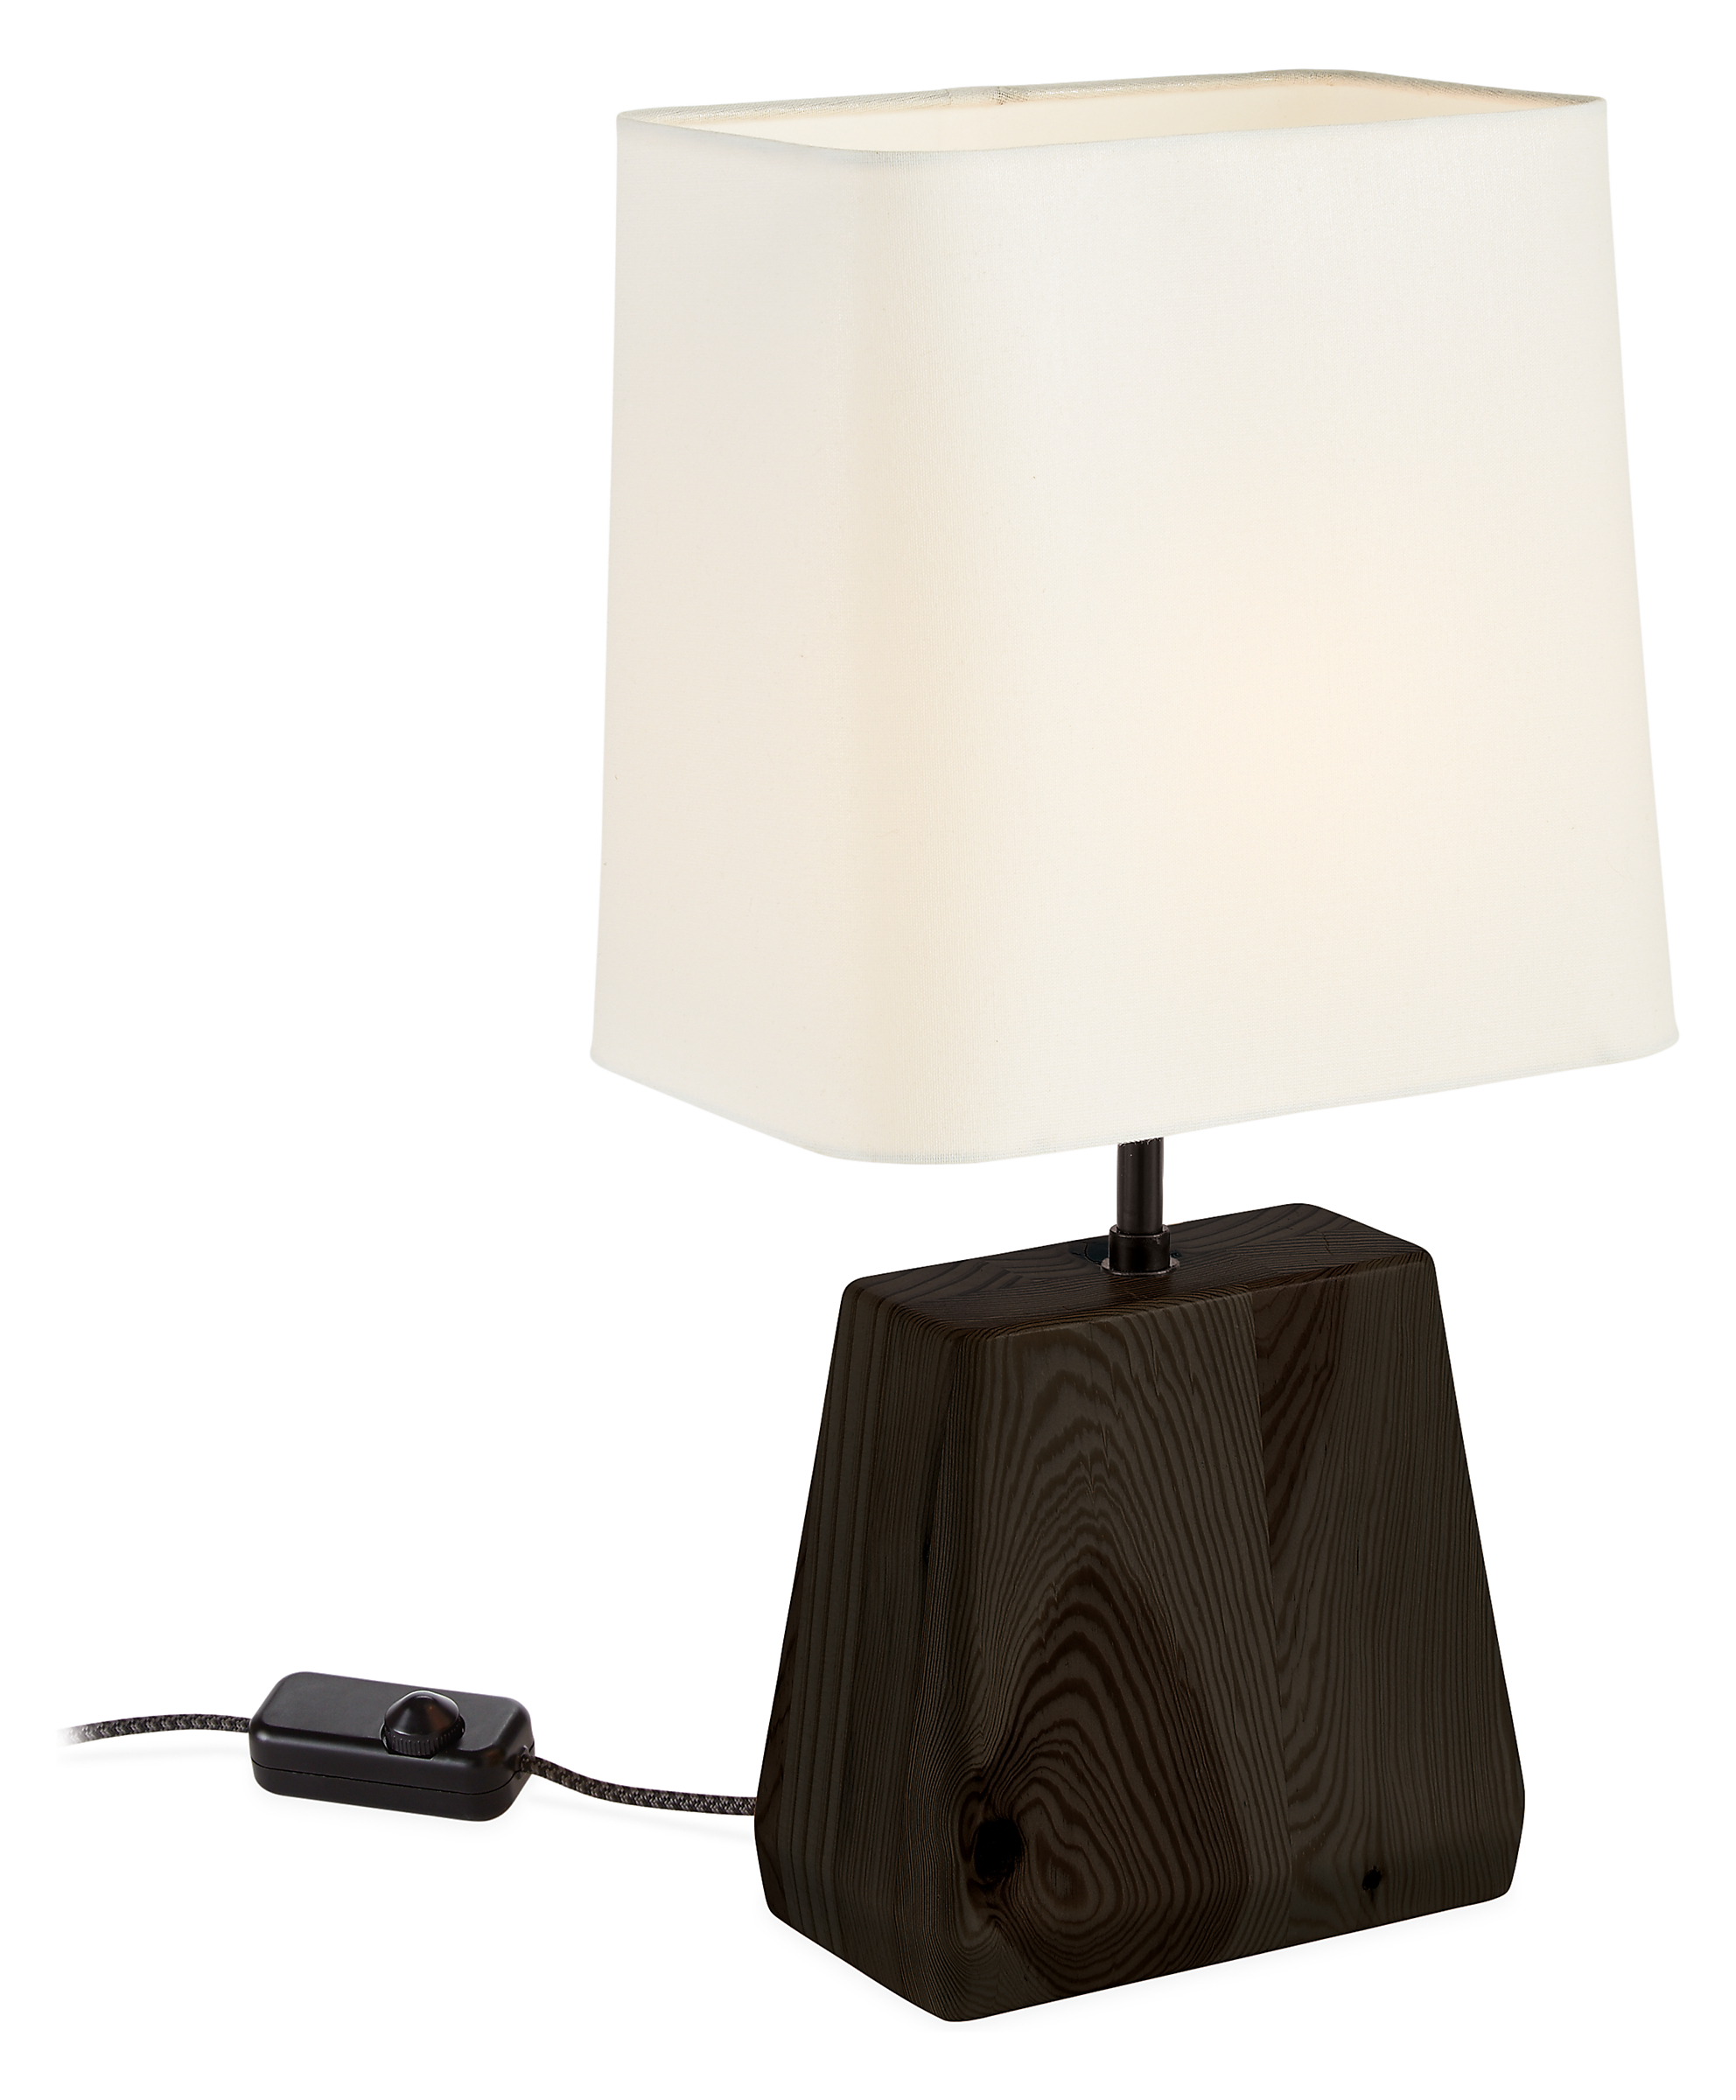 Henson Reclaimed Wood Table Lamp in Charcoal